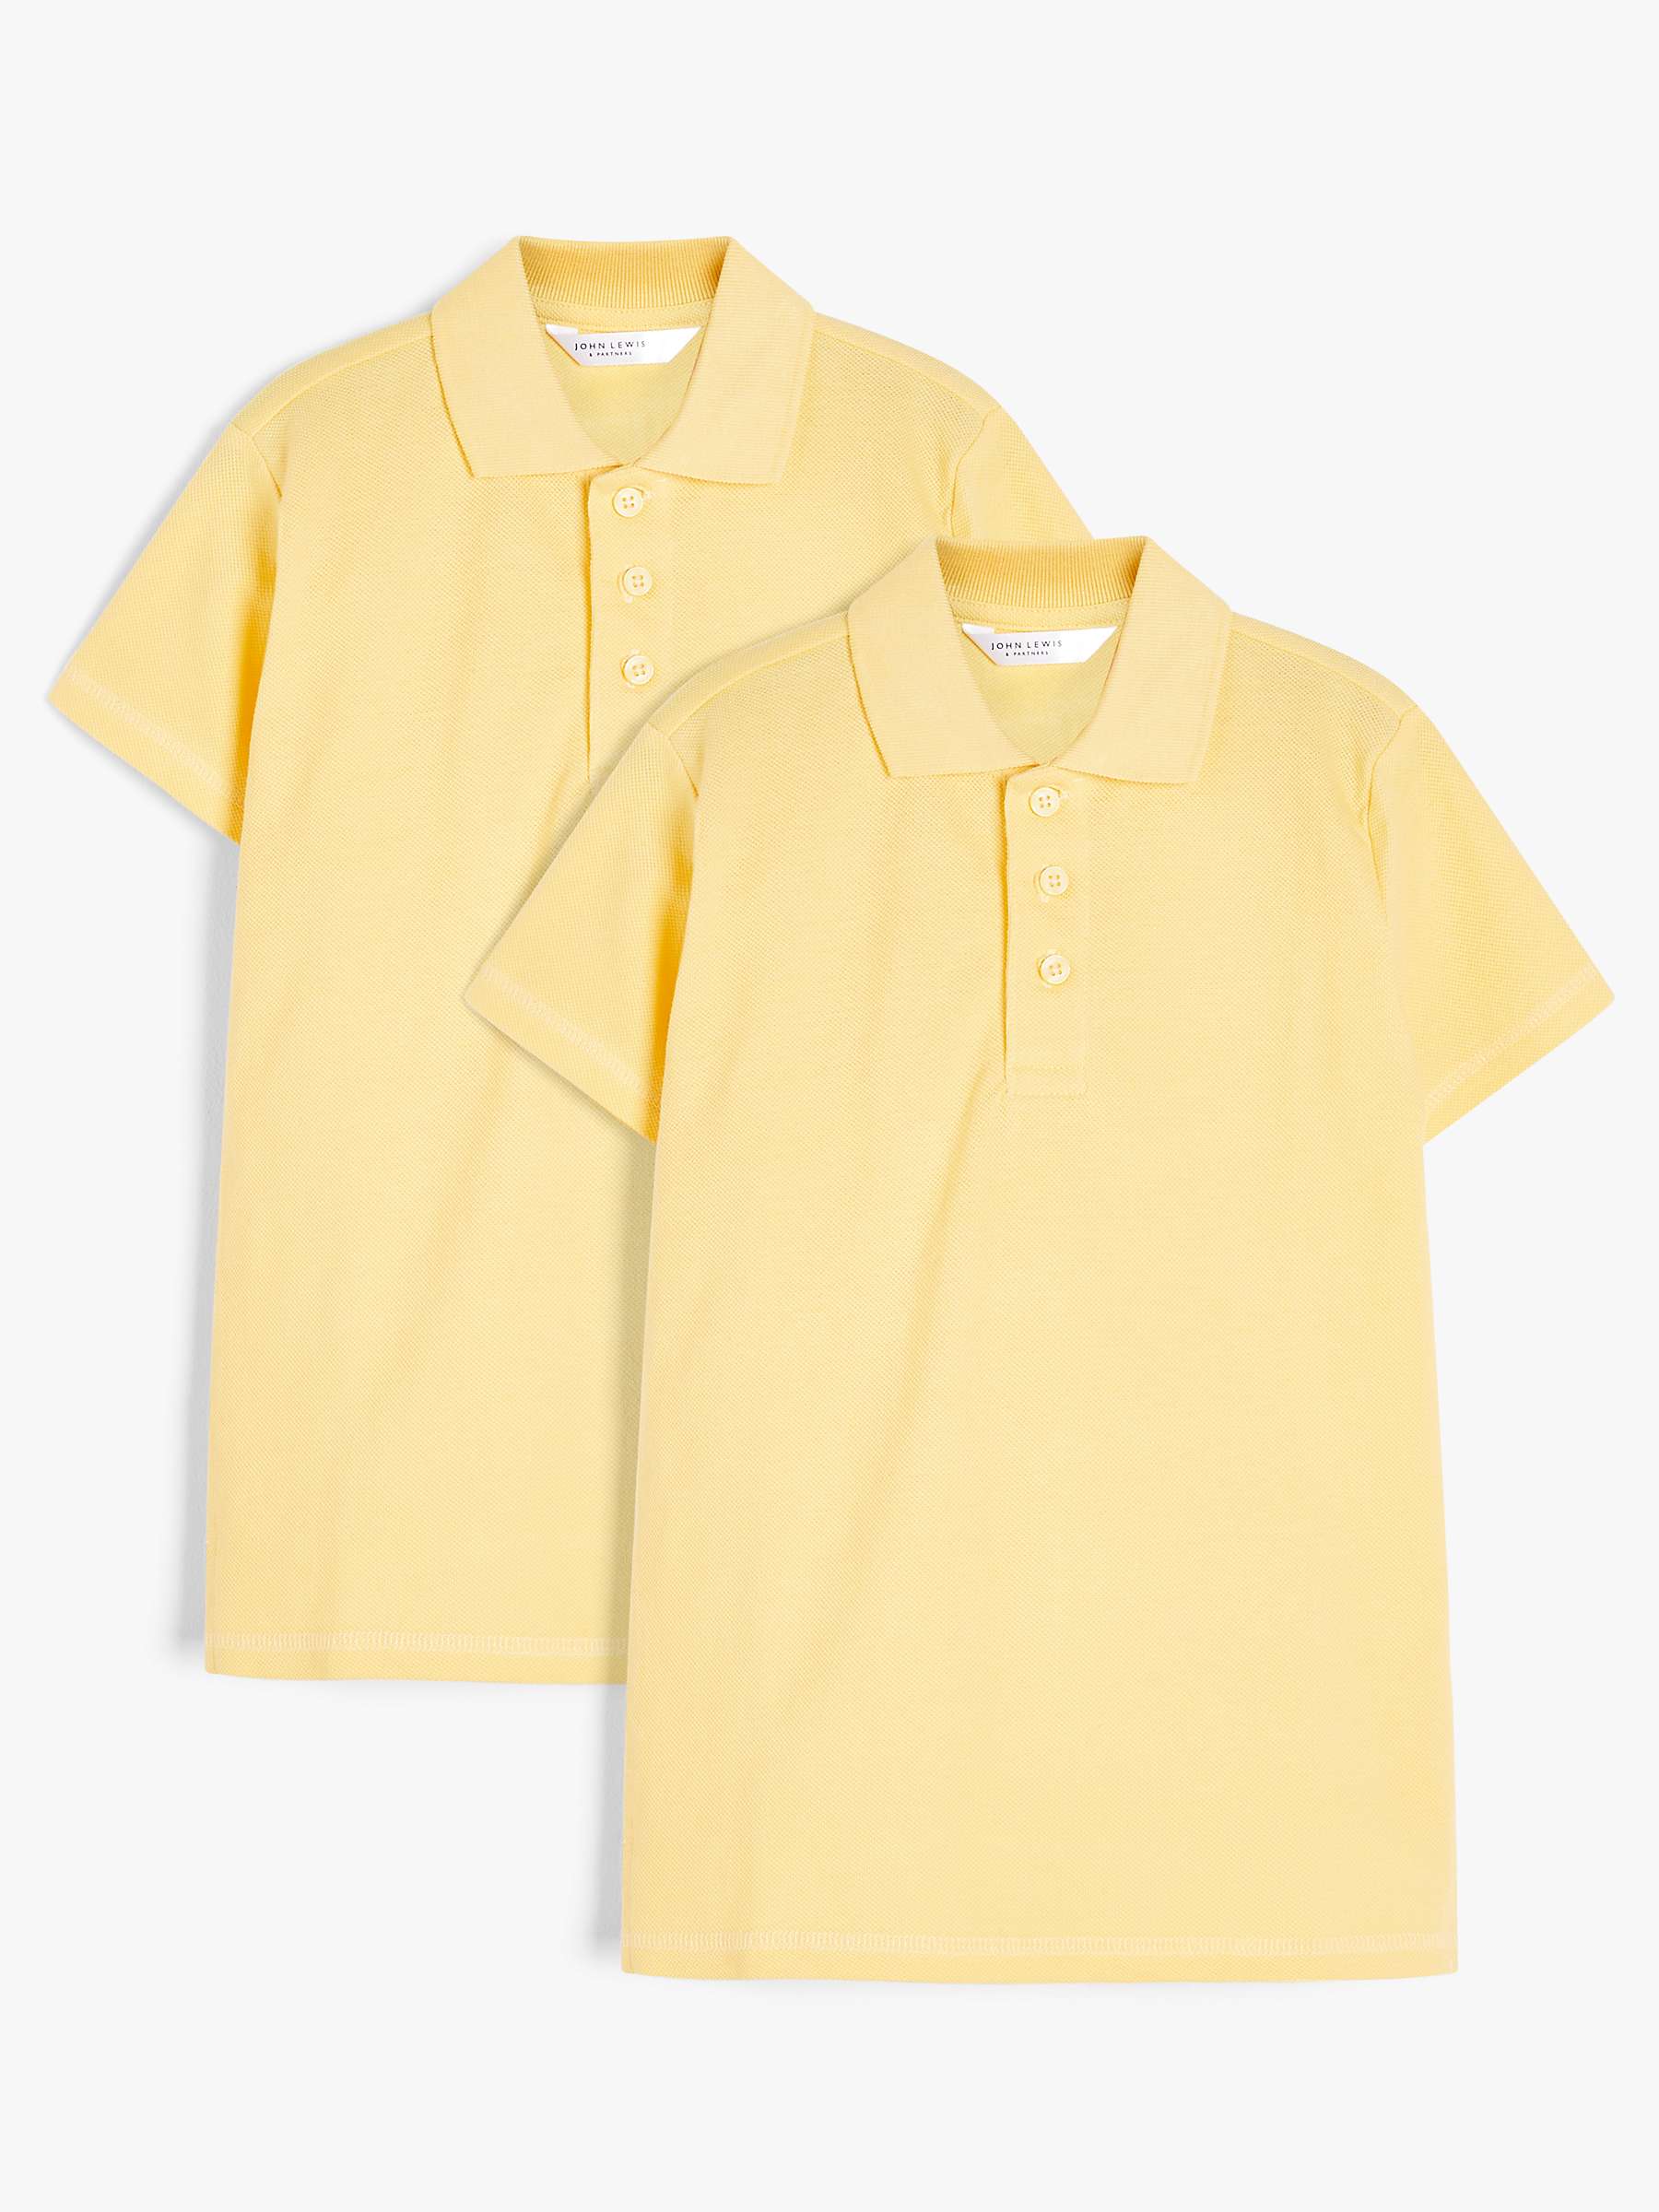 Buy John Lewis Unisex Pure Cotton Easy Care School Polo Shirt, Pack of 2 Online at johnlewis.com